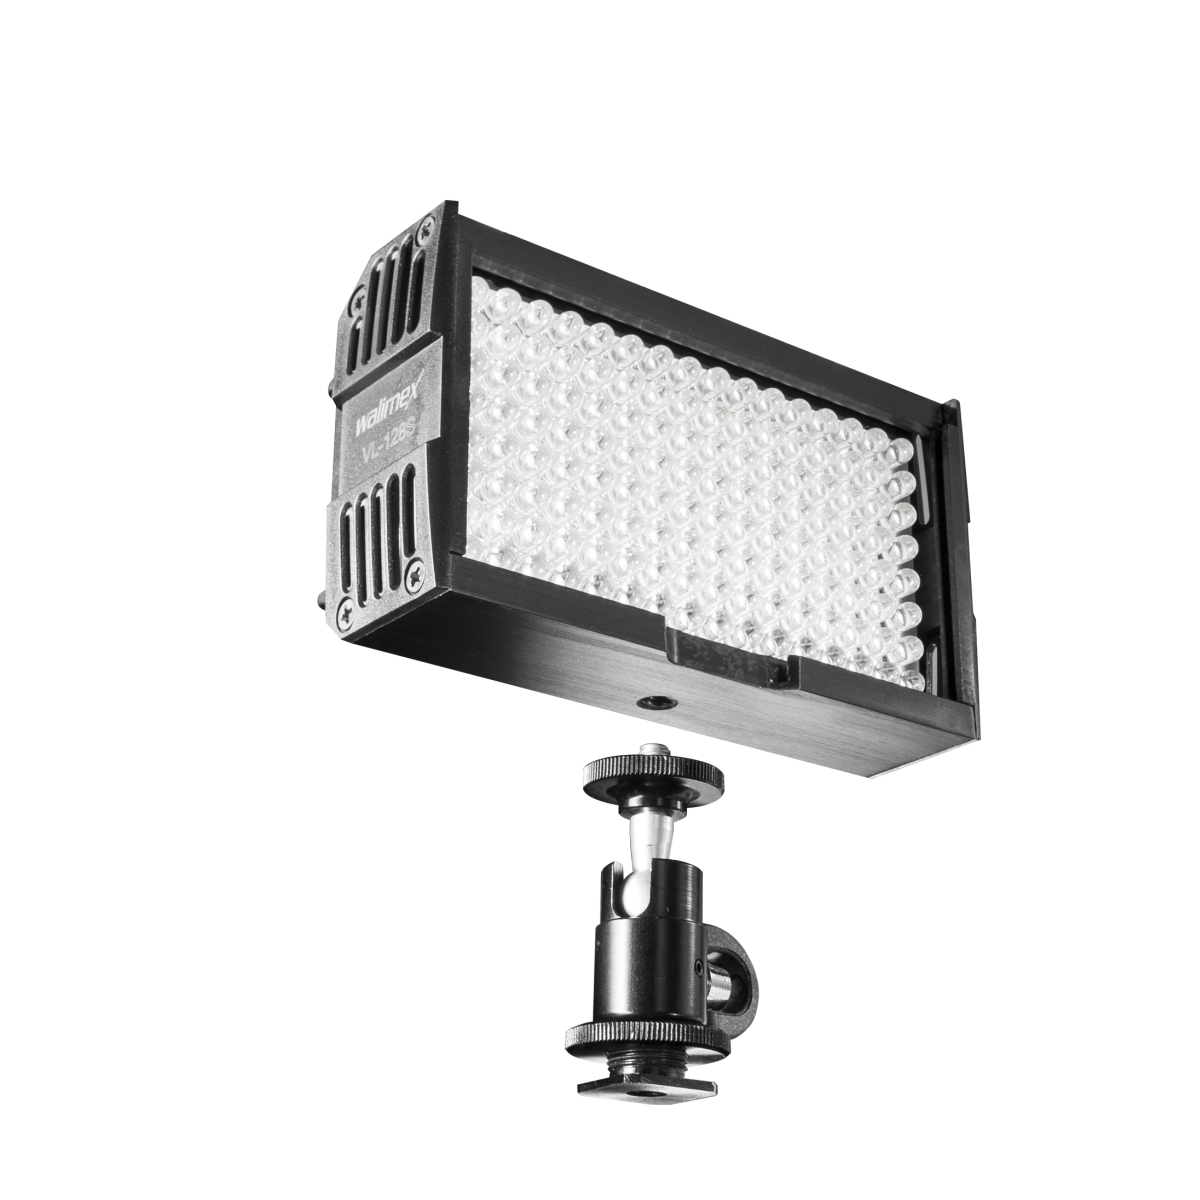 Walimex pro LED Video Light with 128 LED